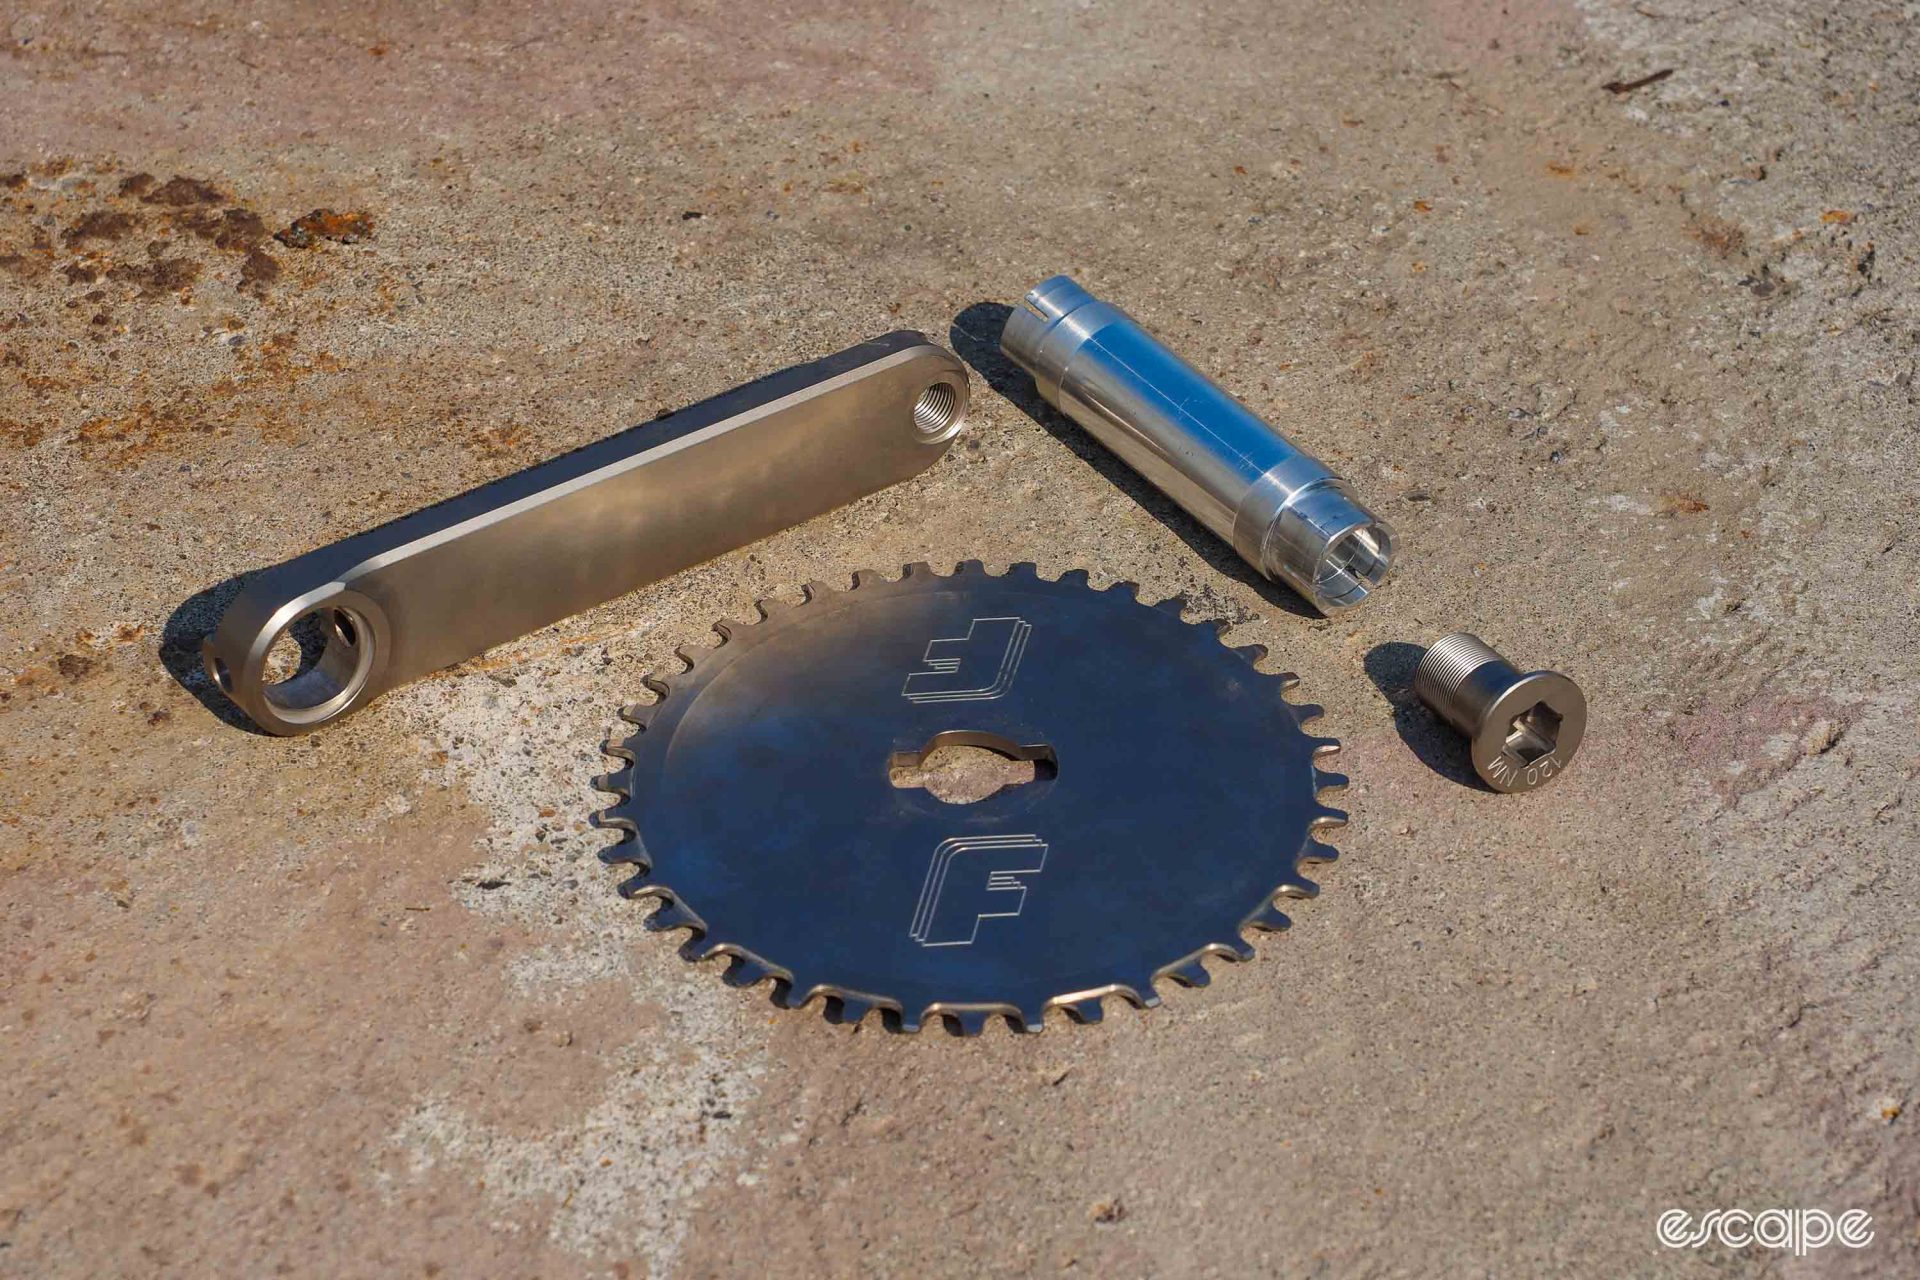 Detail shot of disassembled crank, chainring, and bottom bracket spindle.